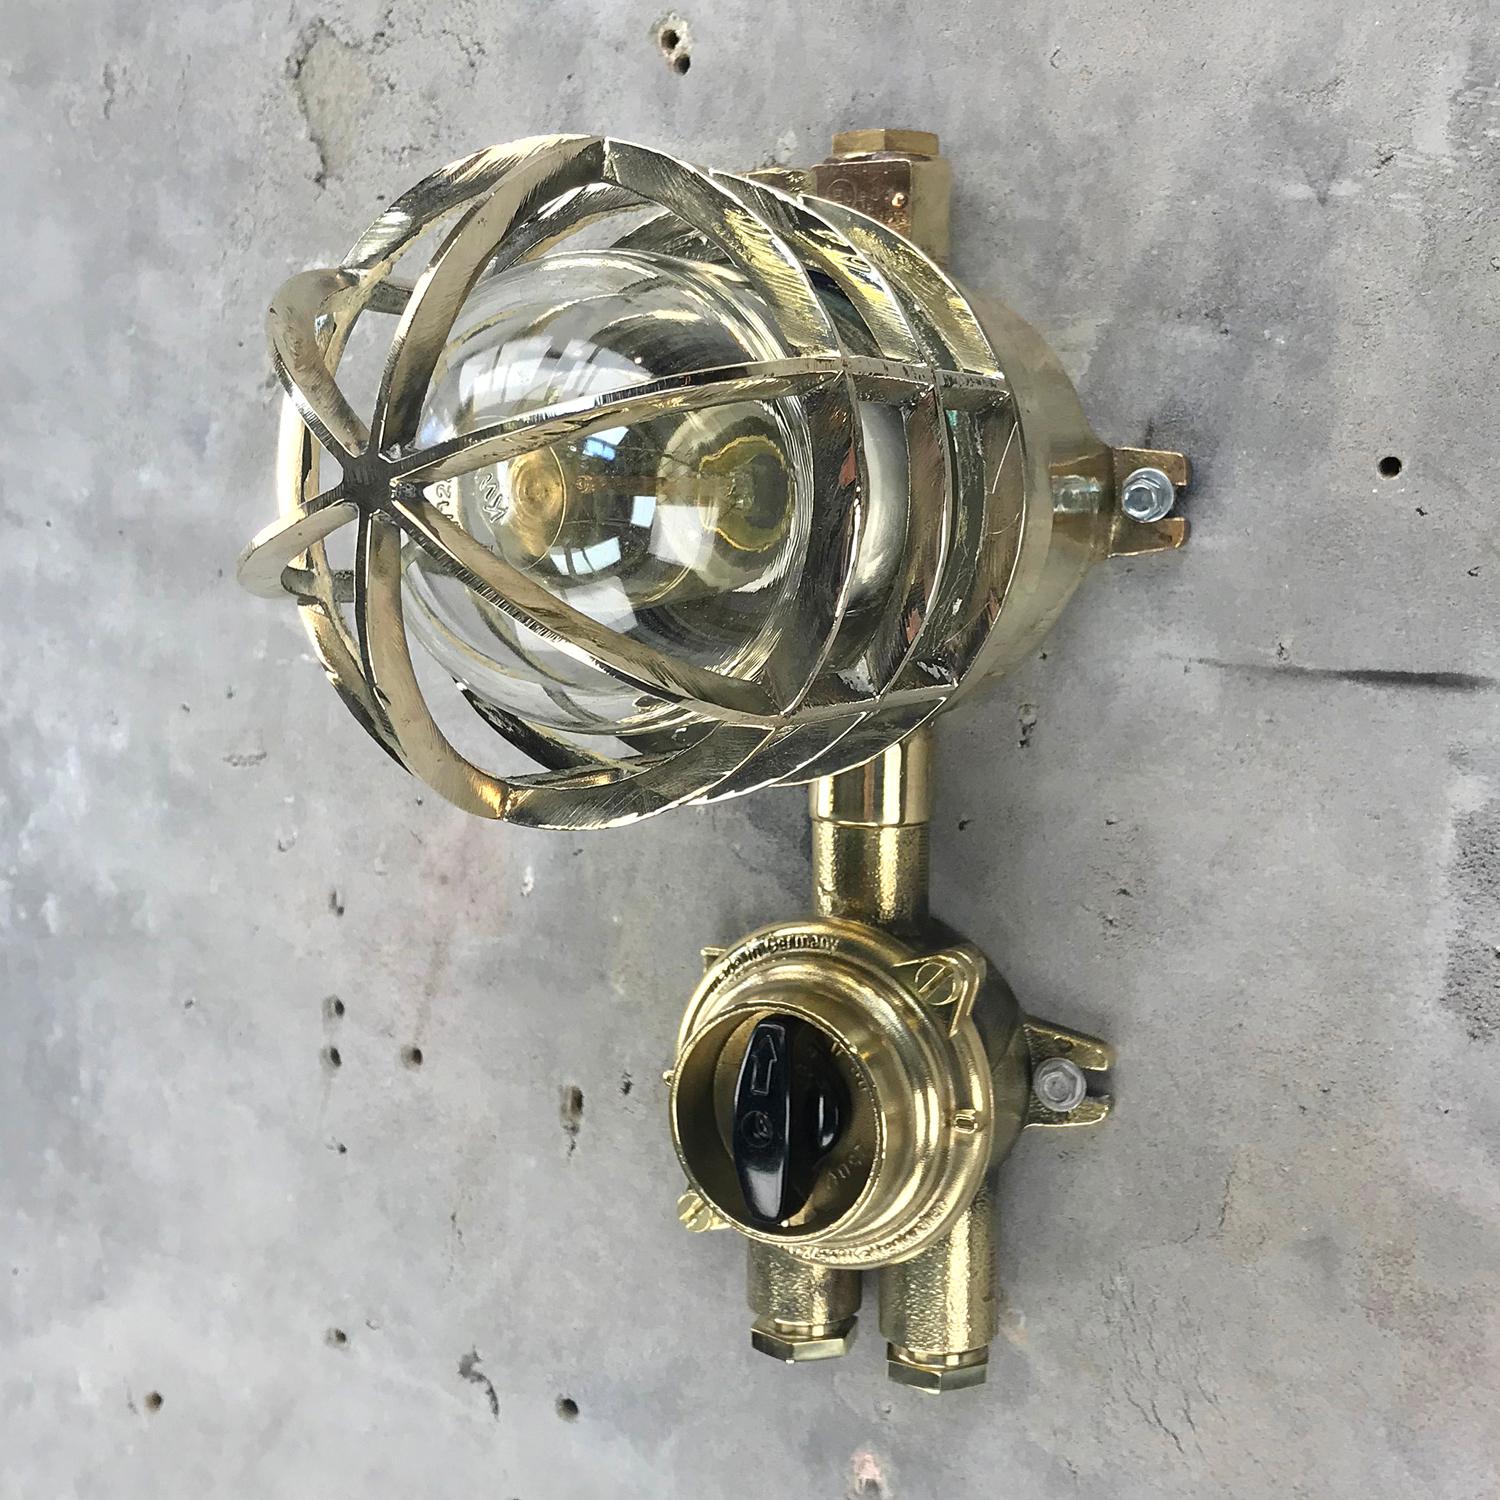 1970s German Explosion Proof Wall Light Cast Brass, Glass Shade & Rotary Switch In Good Condition For Sale In Leicester, Leicestershire